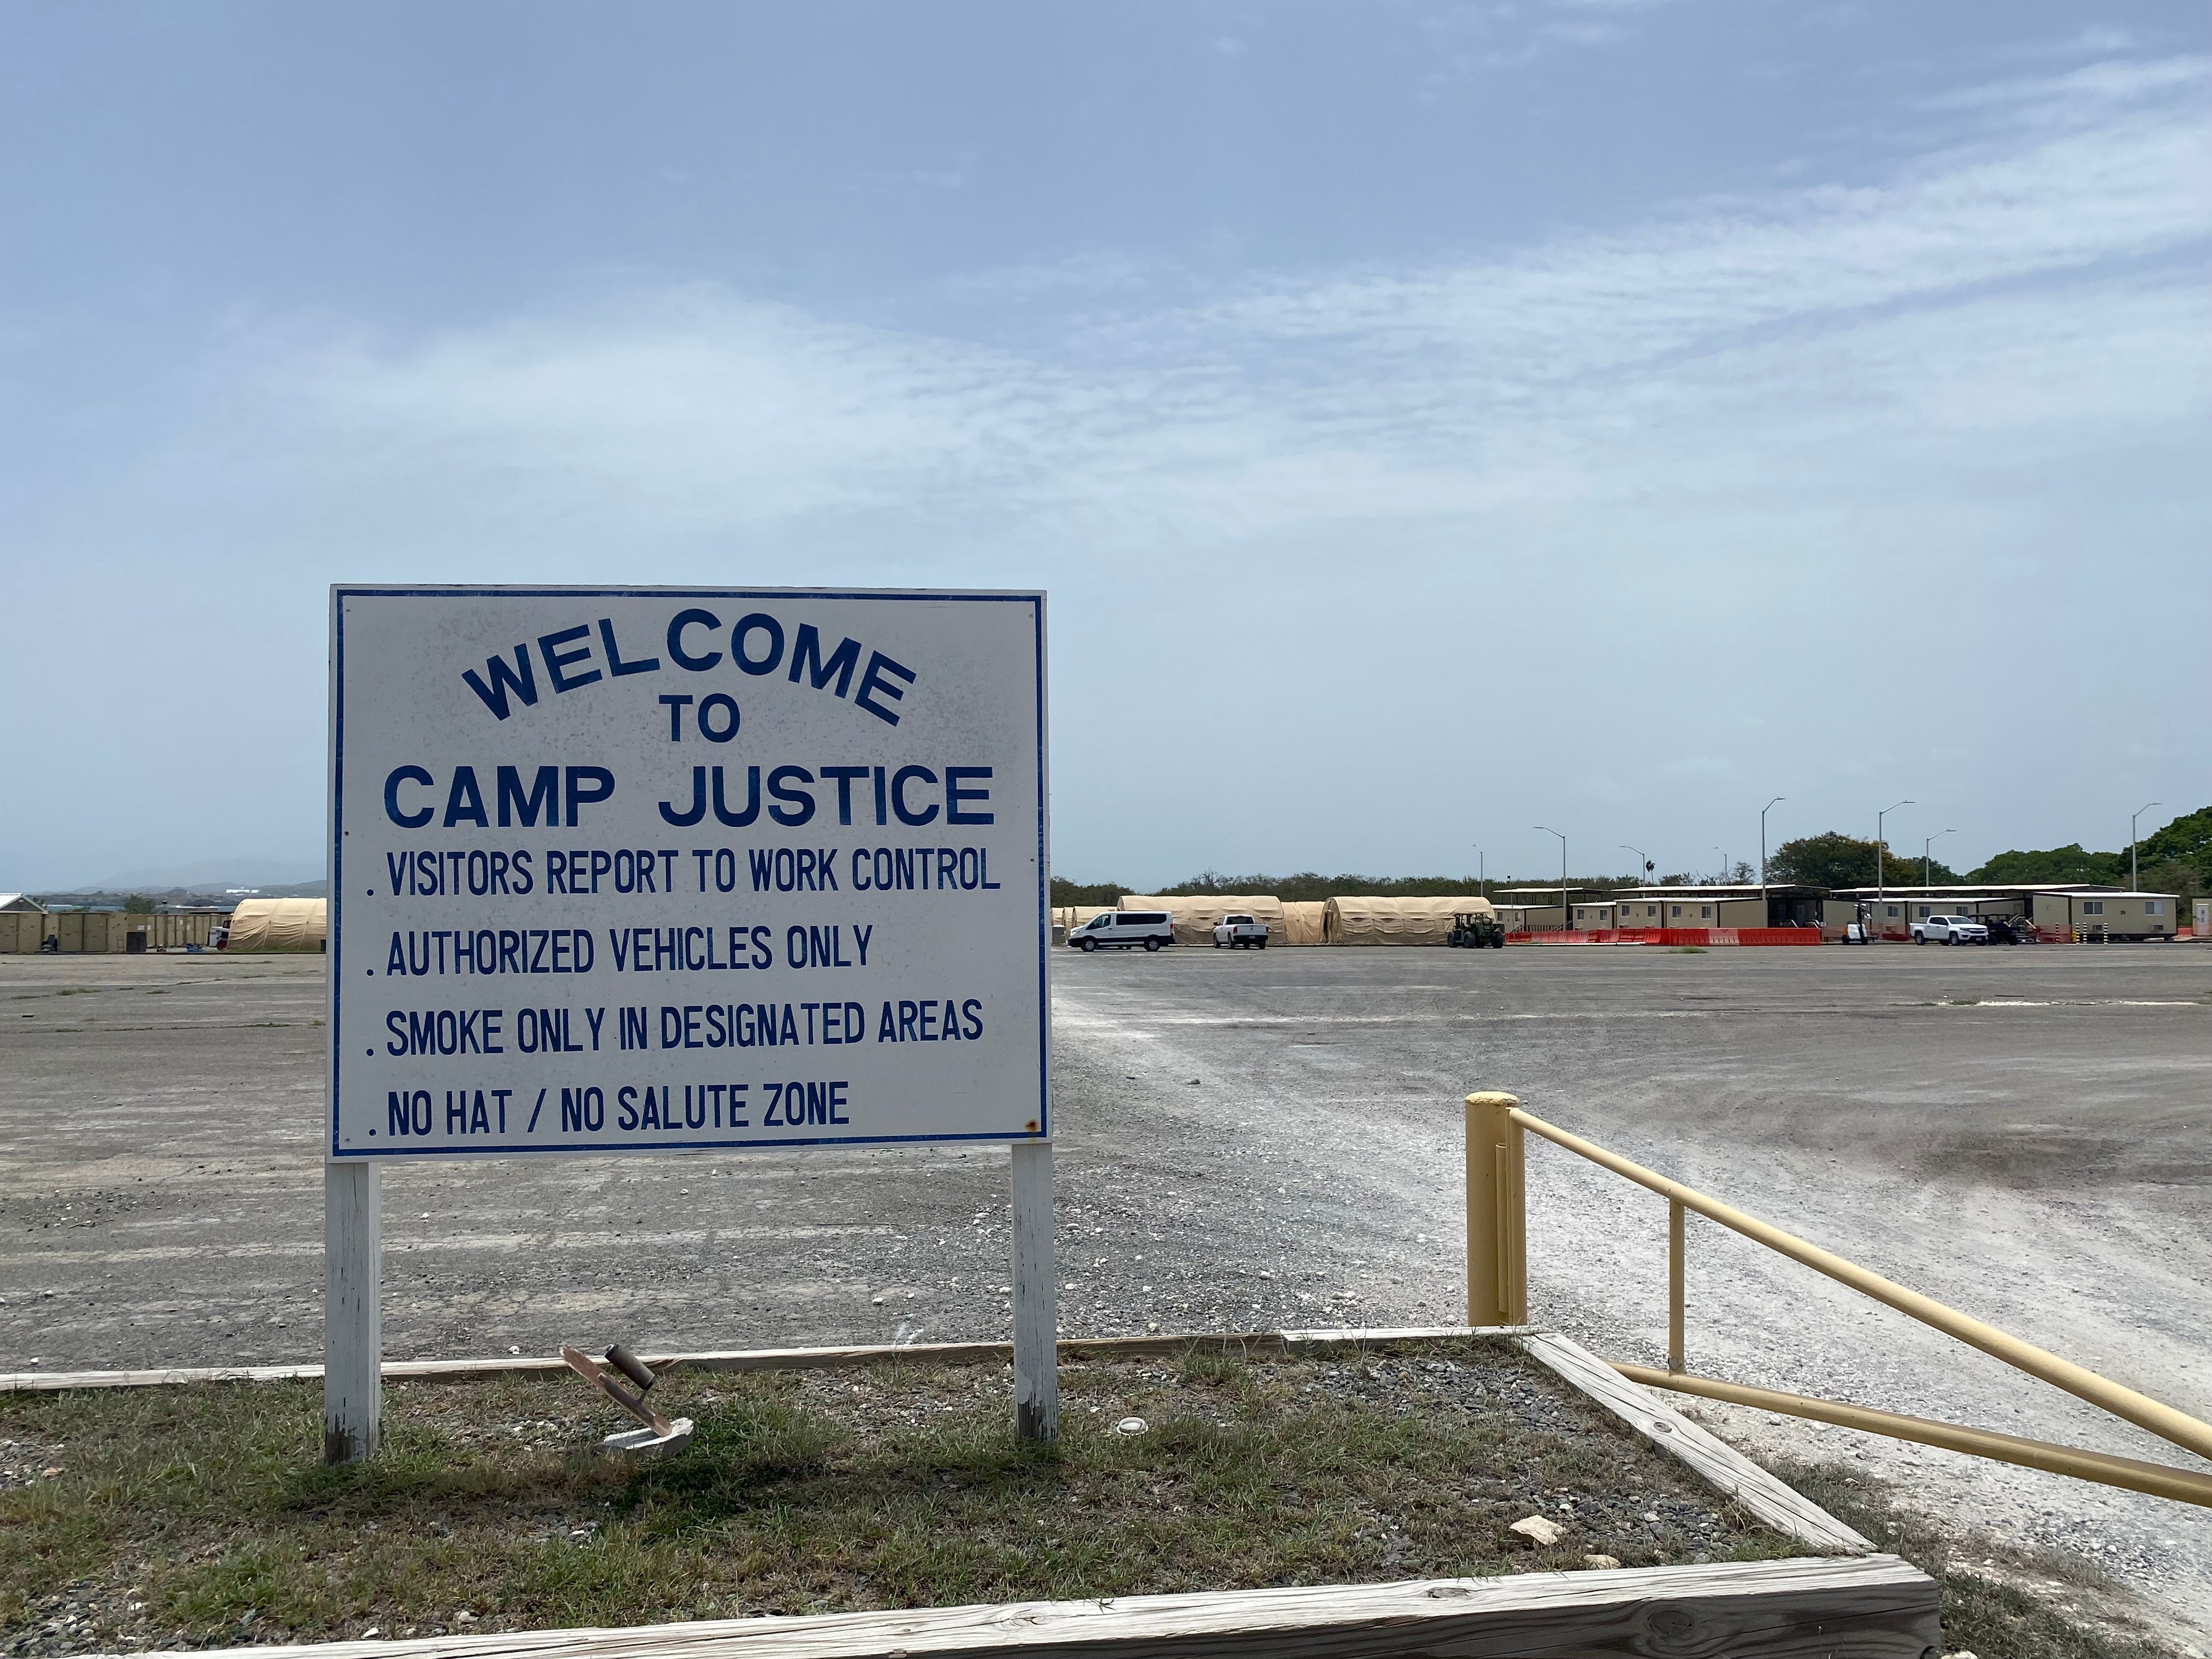 Camp Justice on Guantánamo Bay Naval Base, Cuba, where military trials of terror suspects take place